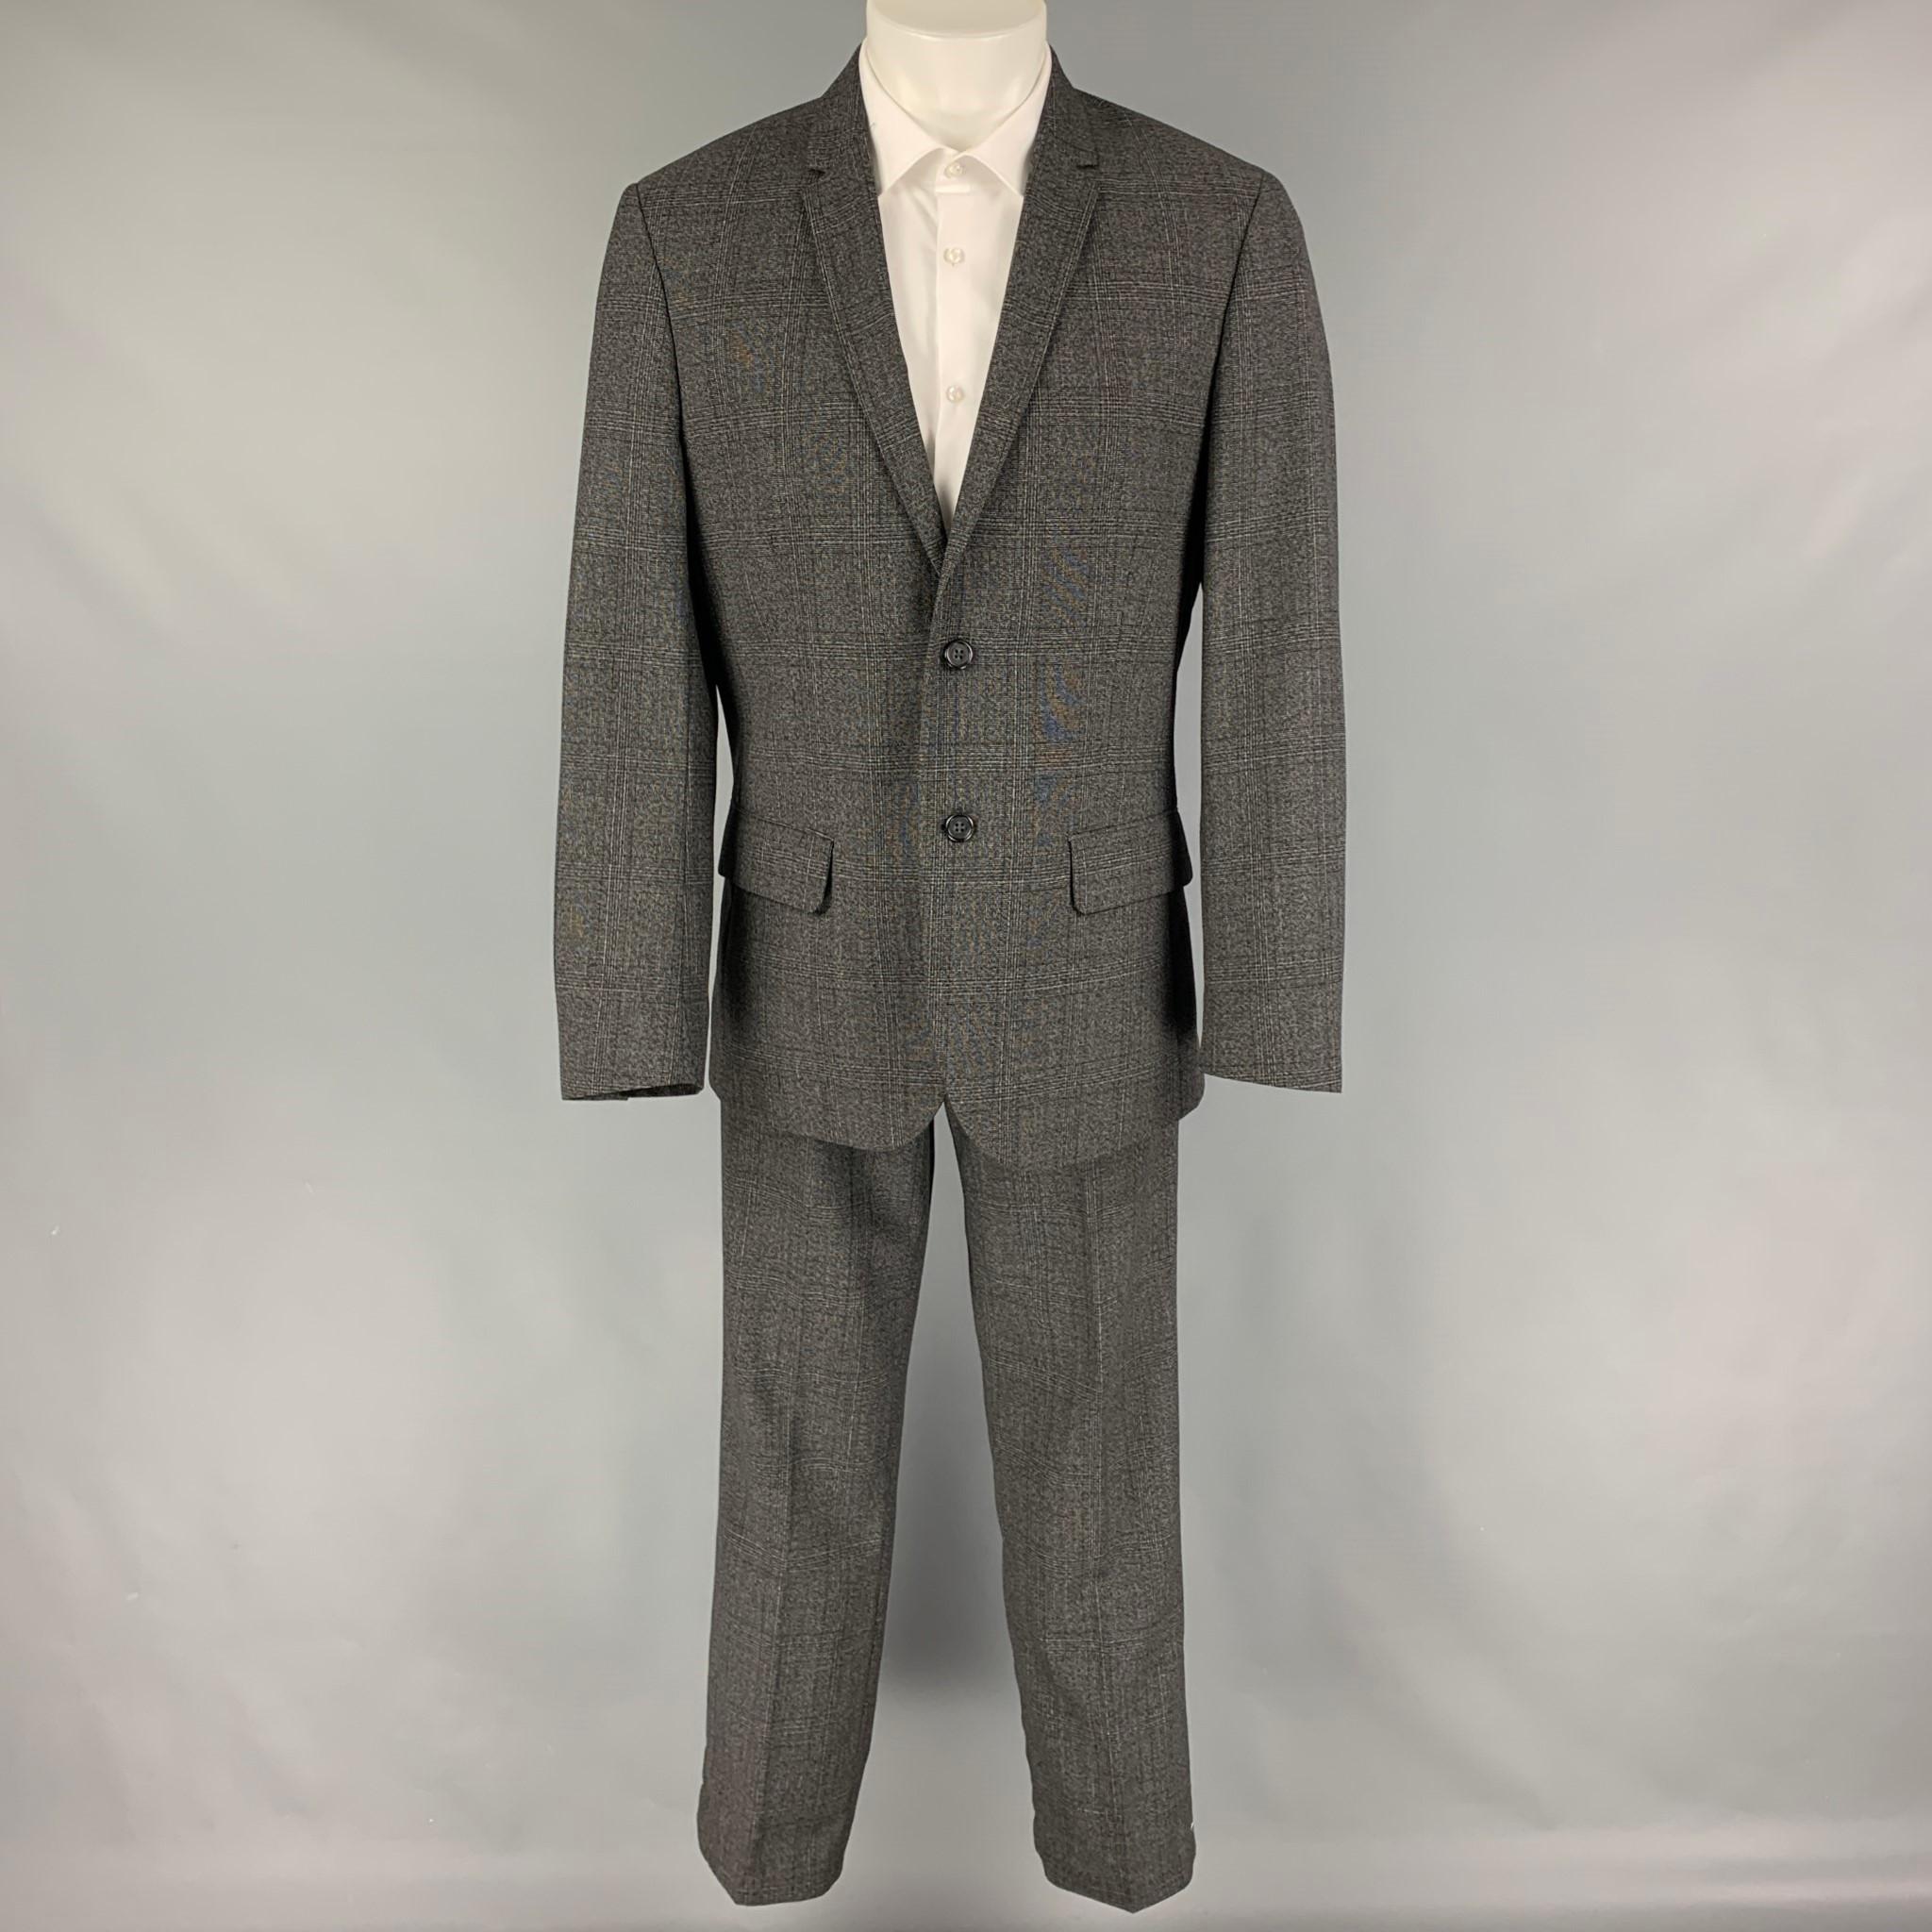 CALVIN KLEIN suit comes in a grey plaid wool with a full liner and includes a singe breasted, double button sport coat with a notch lapel and matching flat front trousers.

Very Good Pre-Owned Condition.
Marked: M

Measurements:

-Jacket
Shoulder: